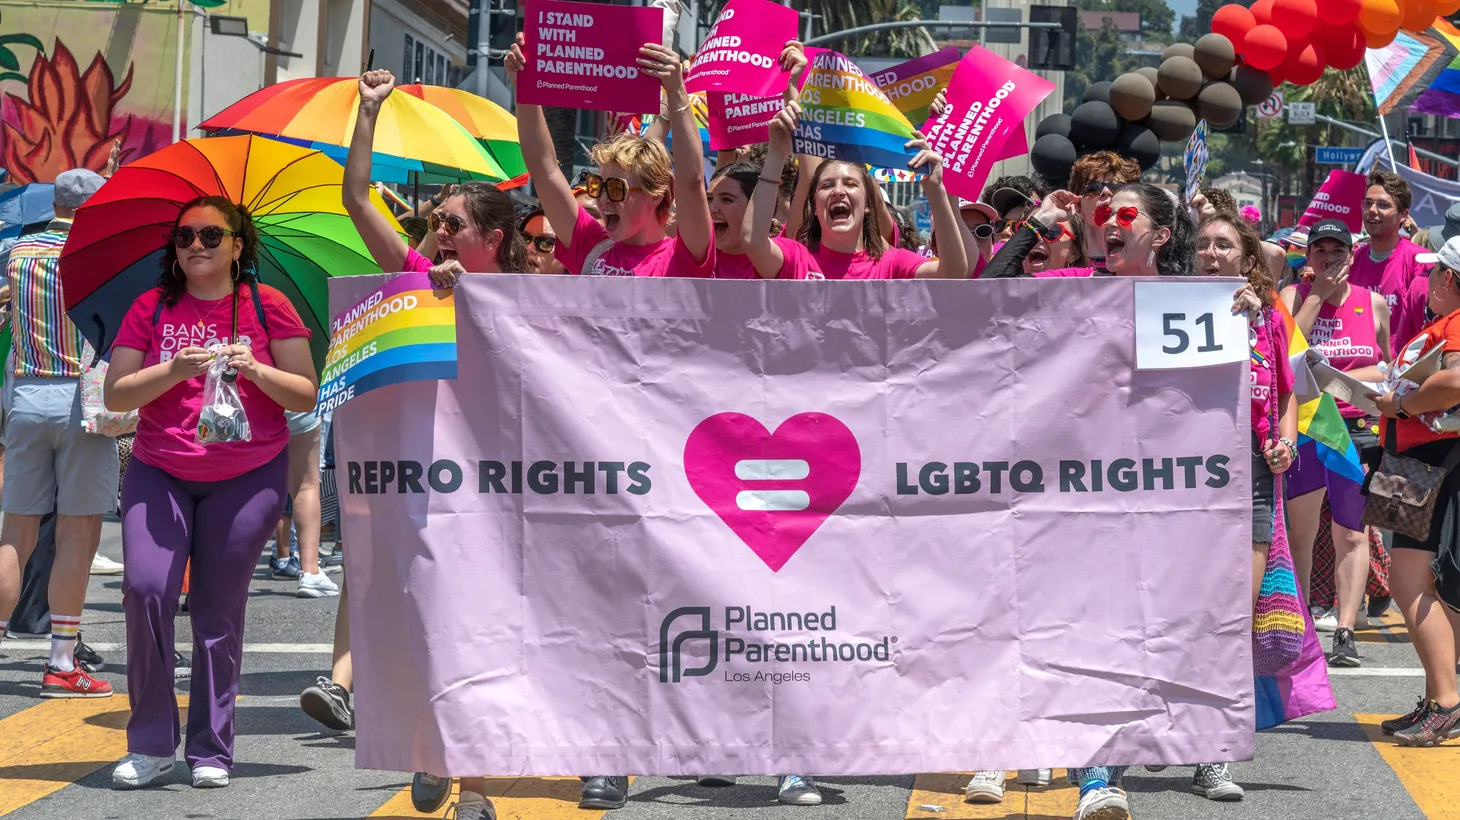 Activists walk with a Planned Parenthood LA banner that says, “Repro rights = LGBTQ rights.”